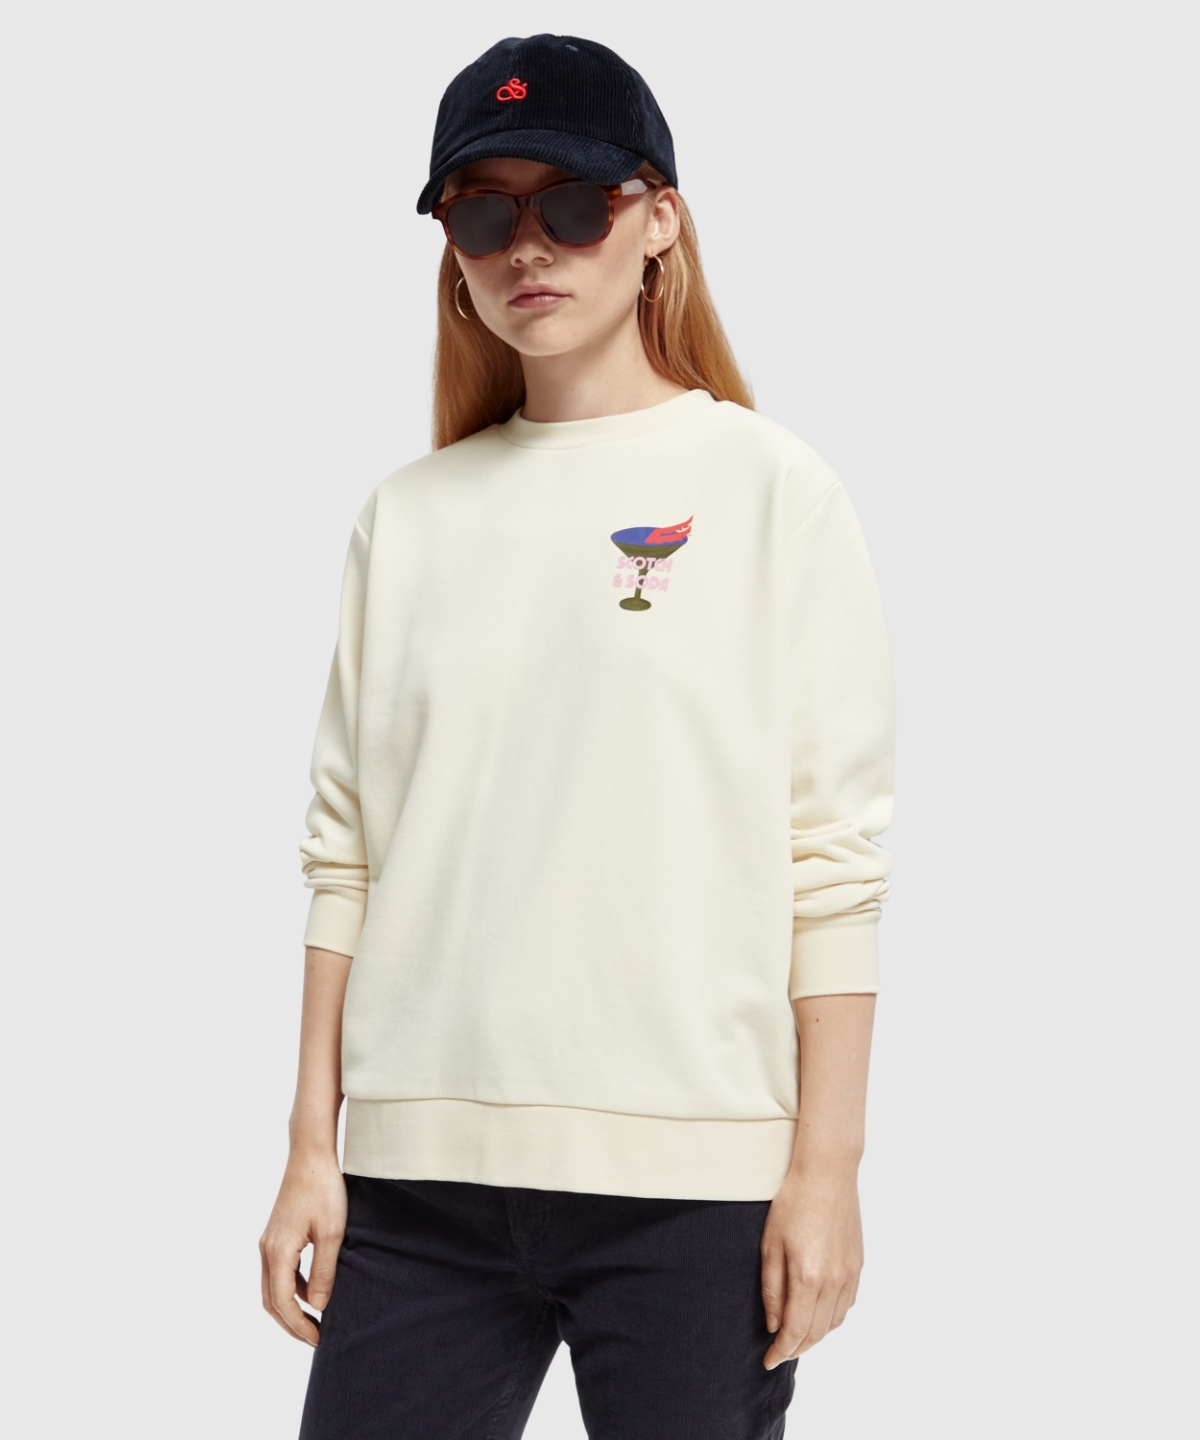 Relaxed fit crewneck sweater